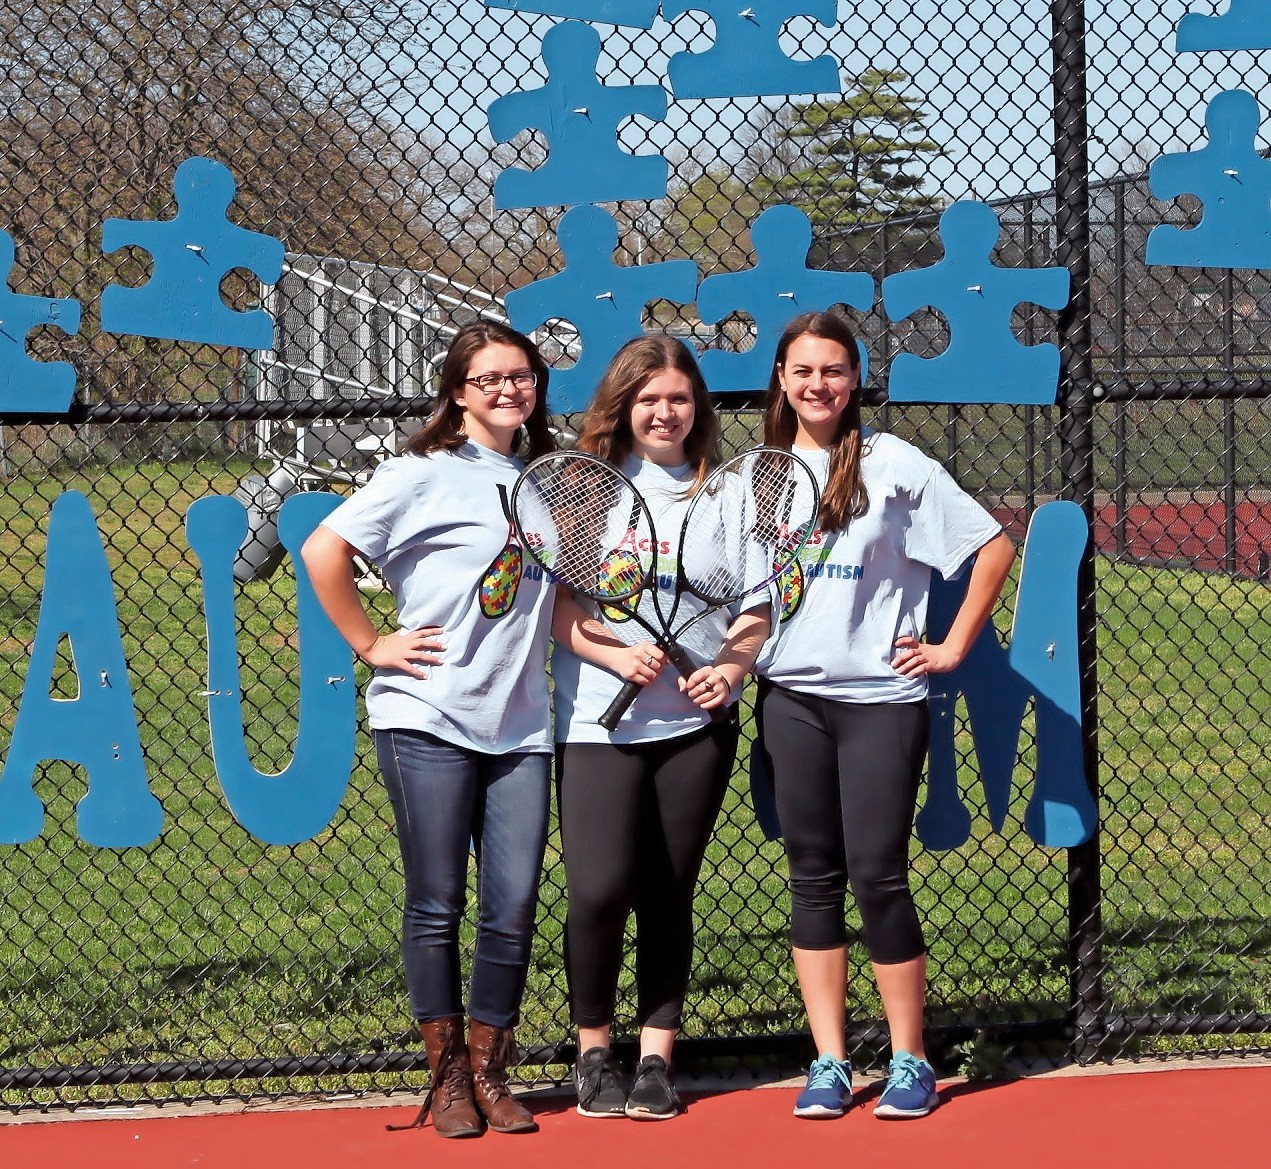 MacArthur High School tennis players Clare Del Grosso, far left, Kristen Cassidy and Alyssa Breeze participated in Aces for Autism, the team’s clinic for students in the Applied Behavior Analysis program, in April.